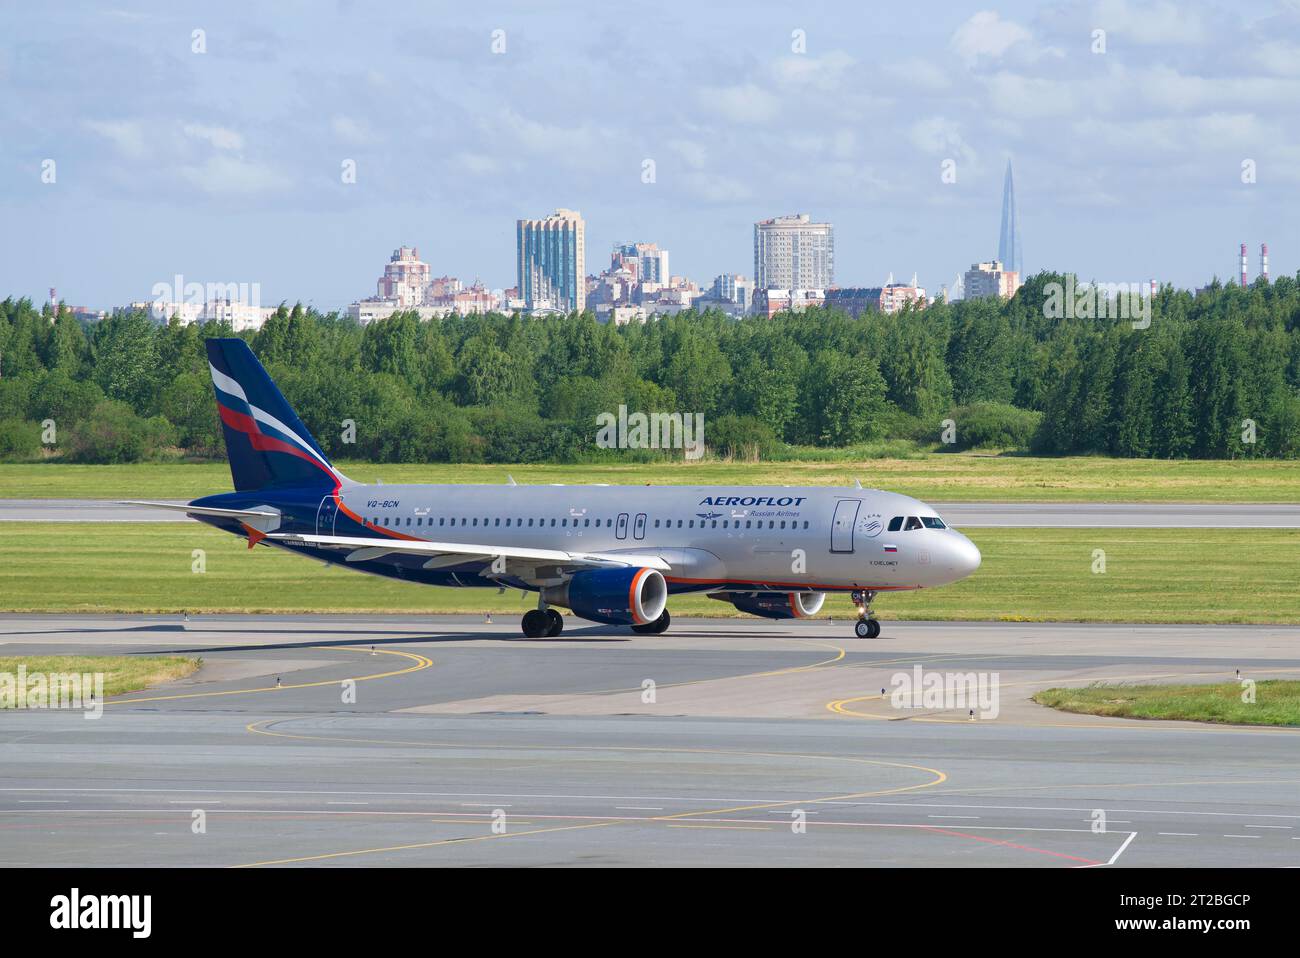 ST. PETERSBURG, RUSSIA - JUNE 20, 2018: The Airbus A320 plane (VQ-BCN) of Aeroflot airline on the taxiway of Pulkovo Airport Stock Photo